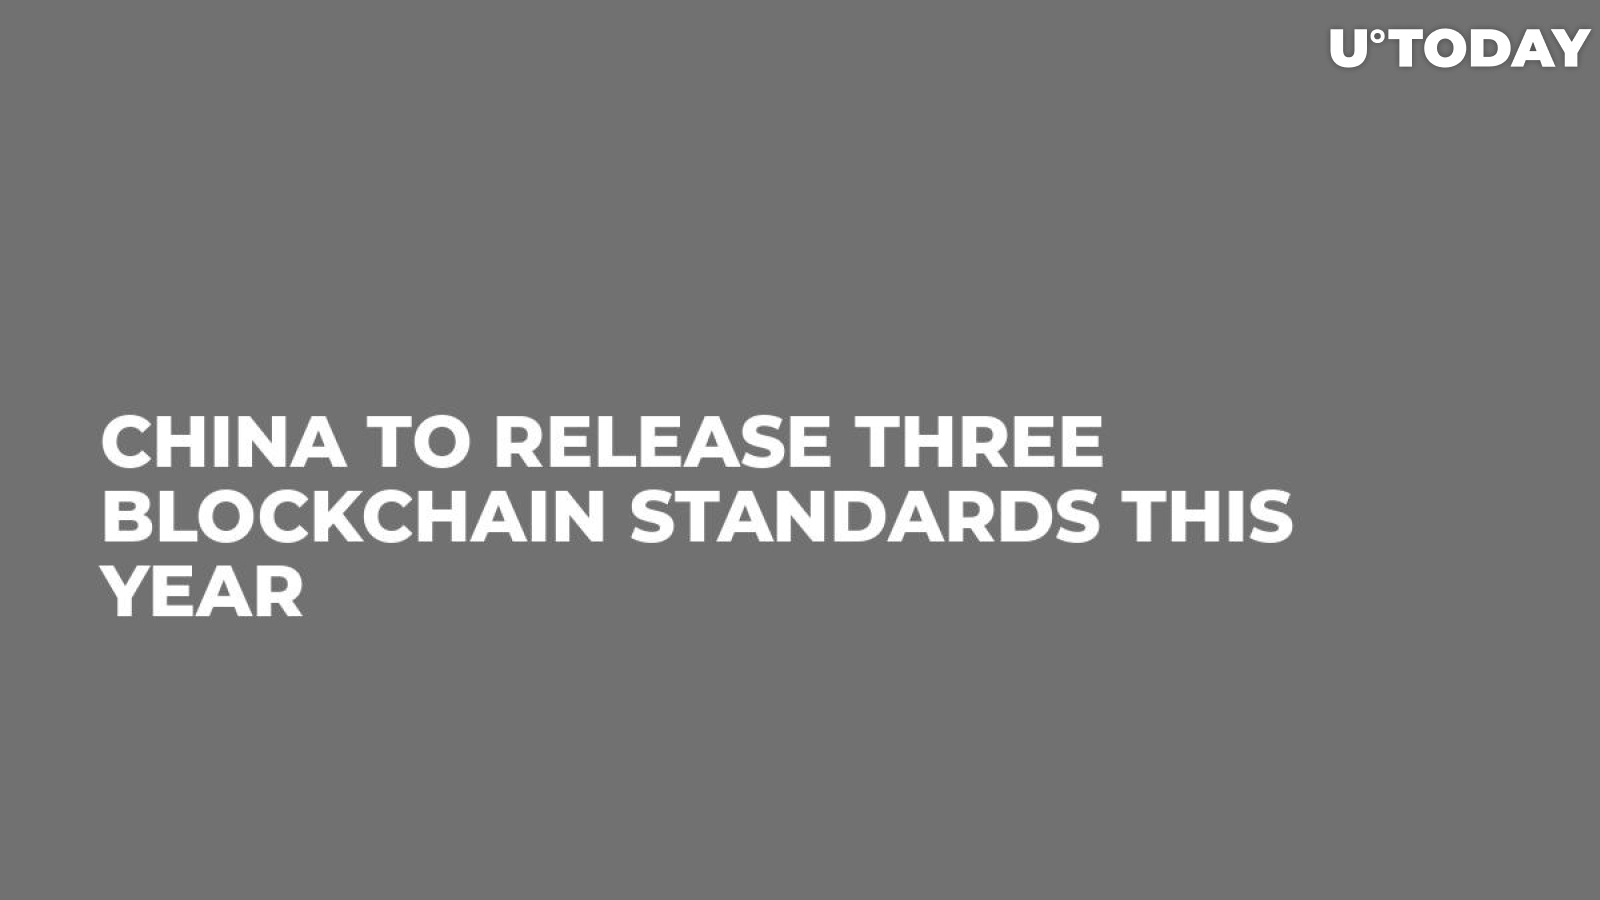 China To Release Three Blockchain Standards This Year